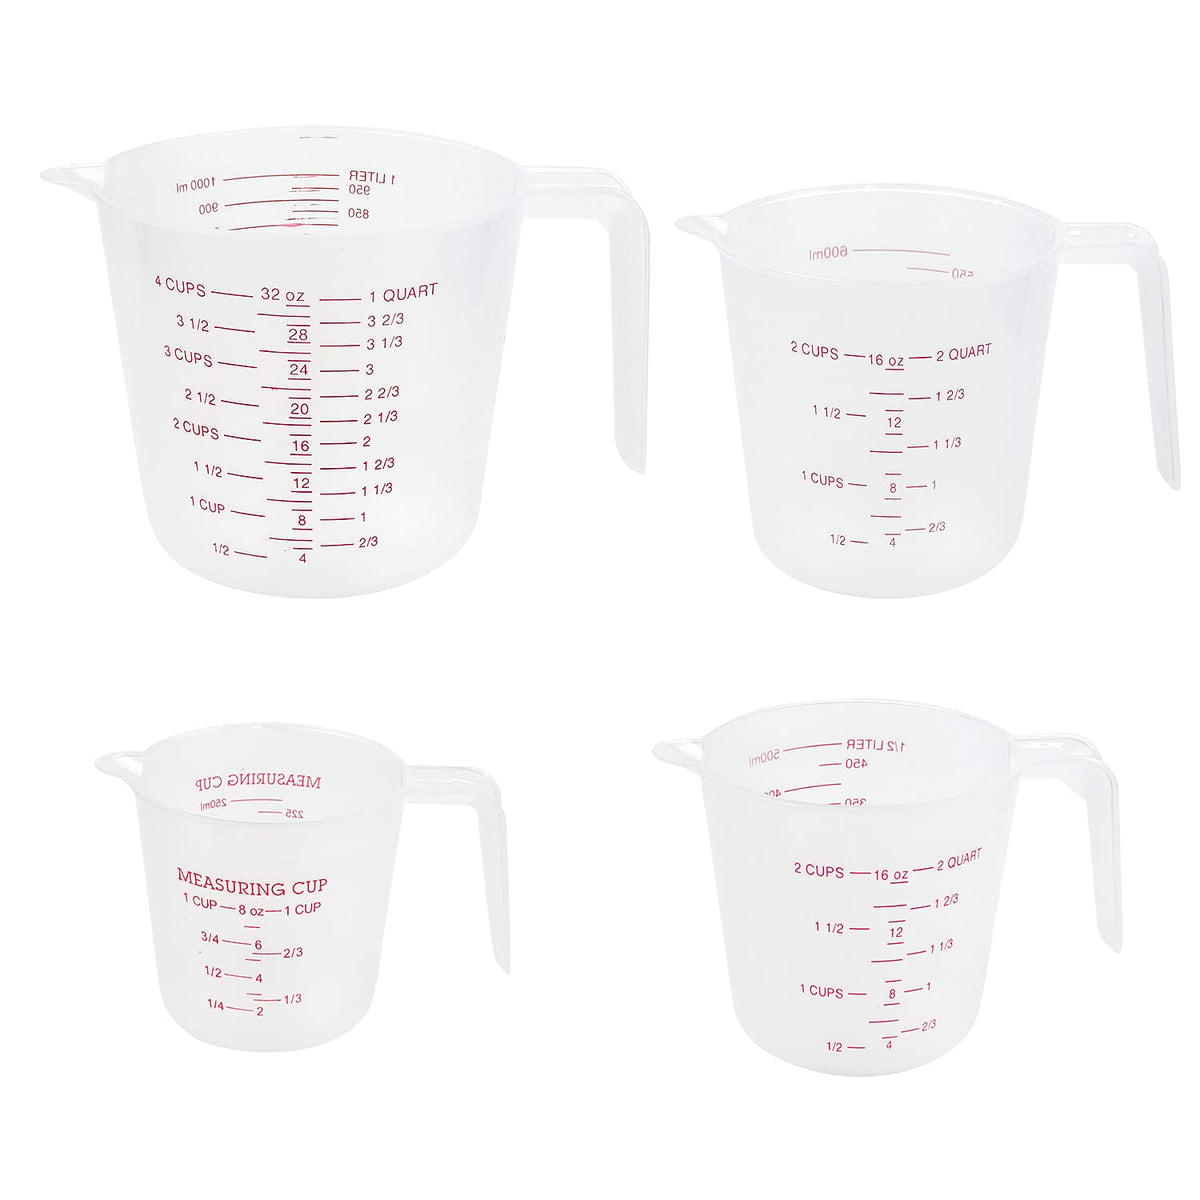  Holoras 1000ml Plastic Measuring Cup Clear Measuring Jug for Measure  Liquid and Baking Items, Kitchen Lab Use: Home & Kitchen